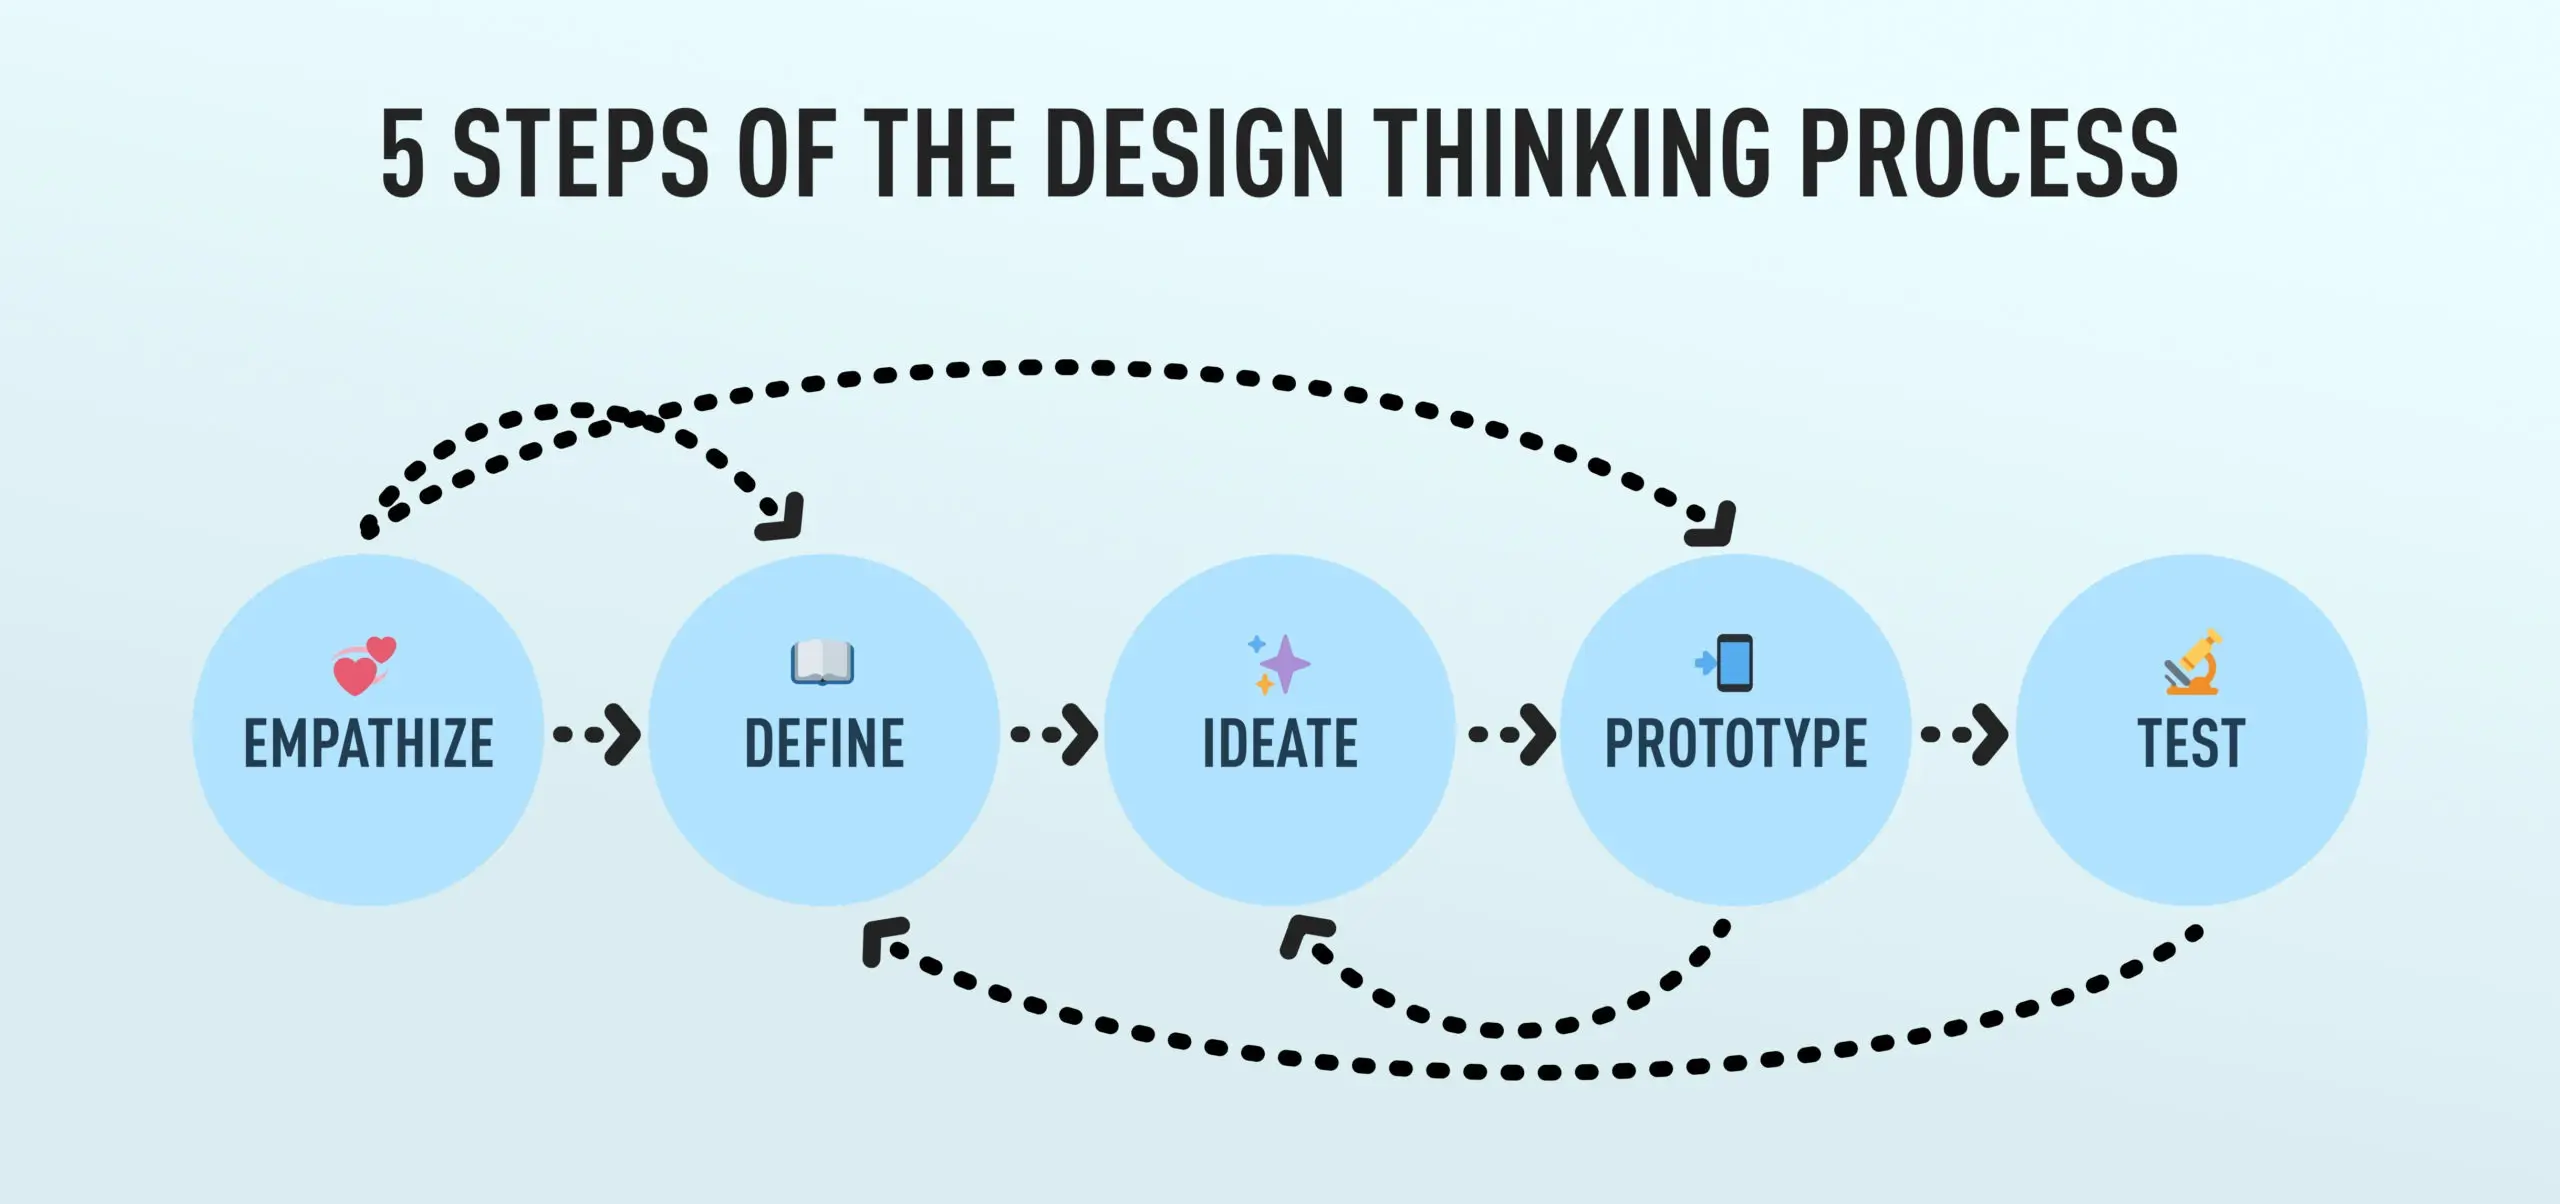 Diagram of the 5 stages of the design thinking process